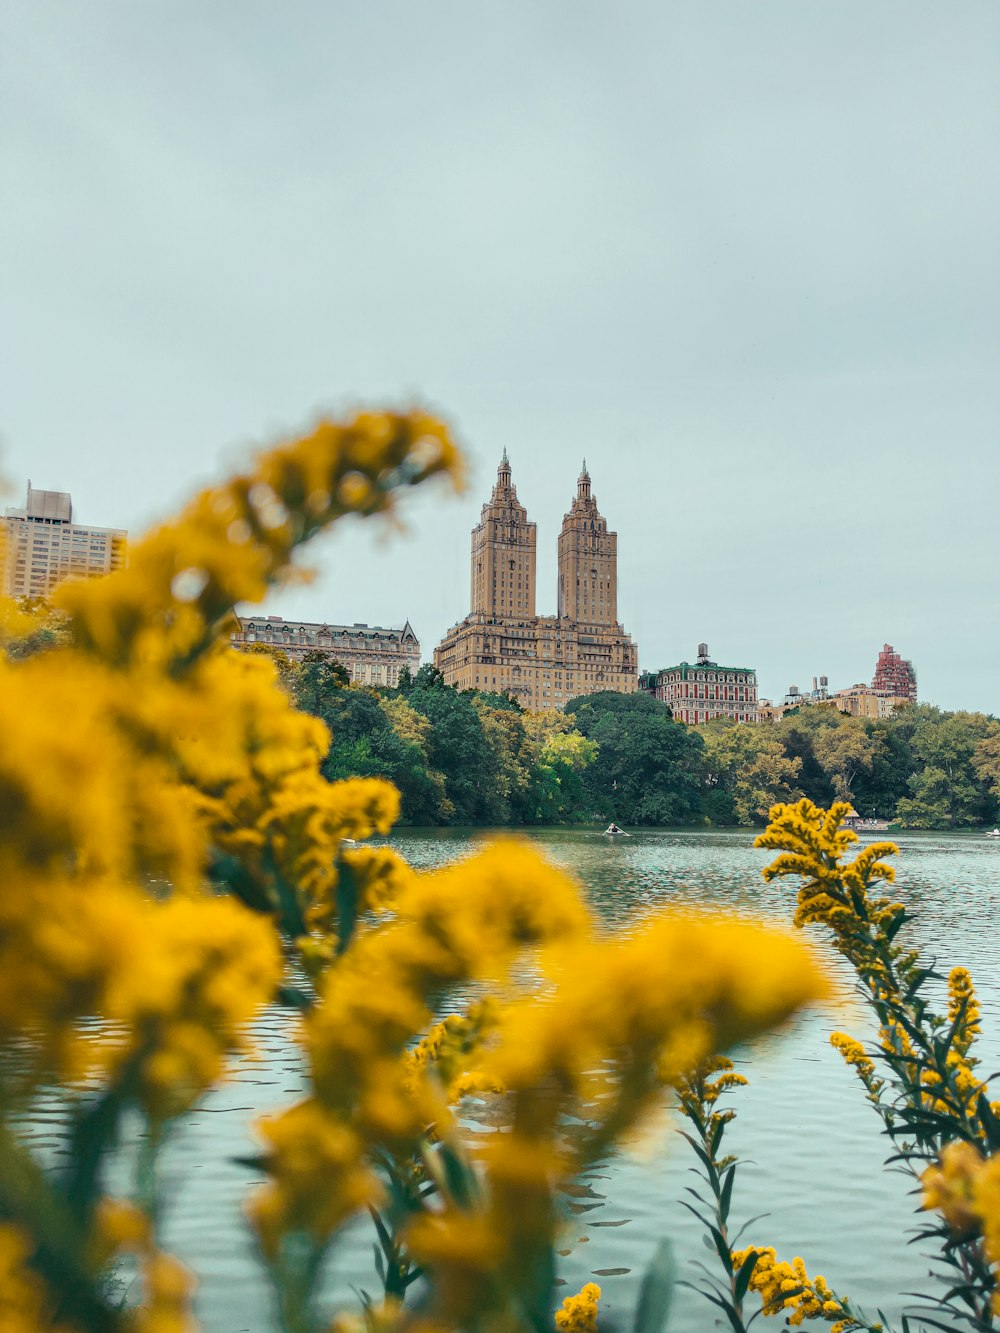 yellow flowers in front of a river and a large building